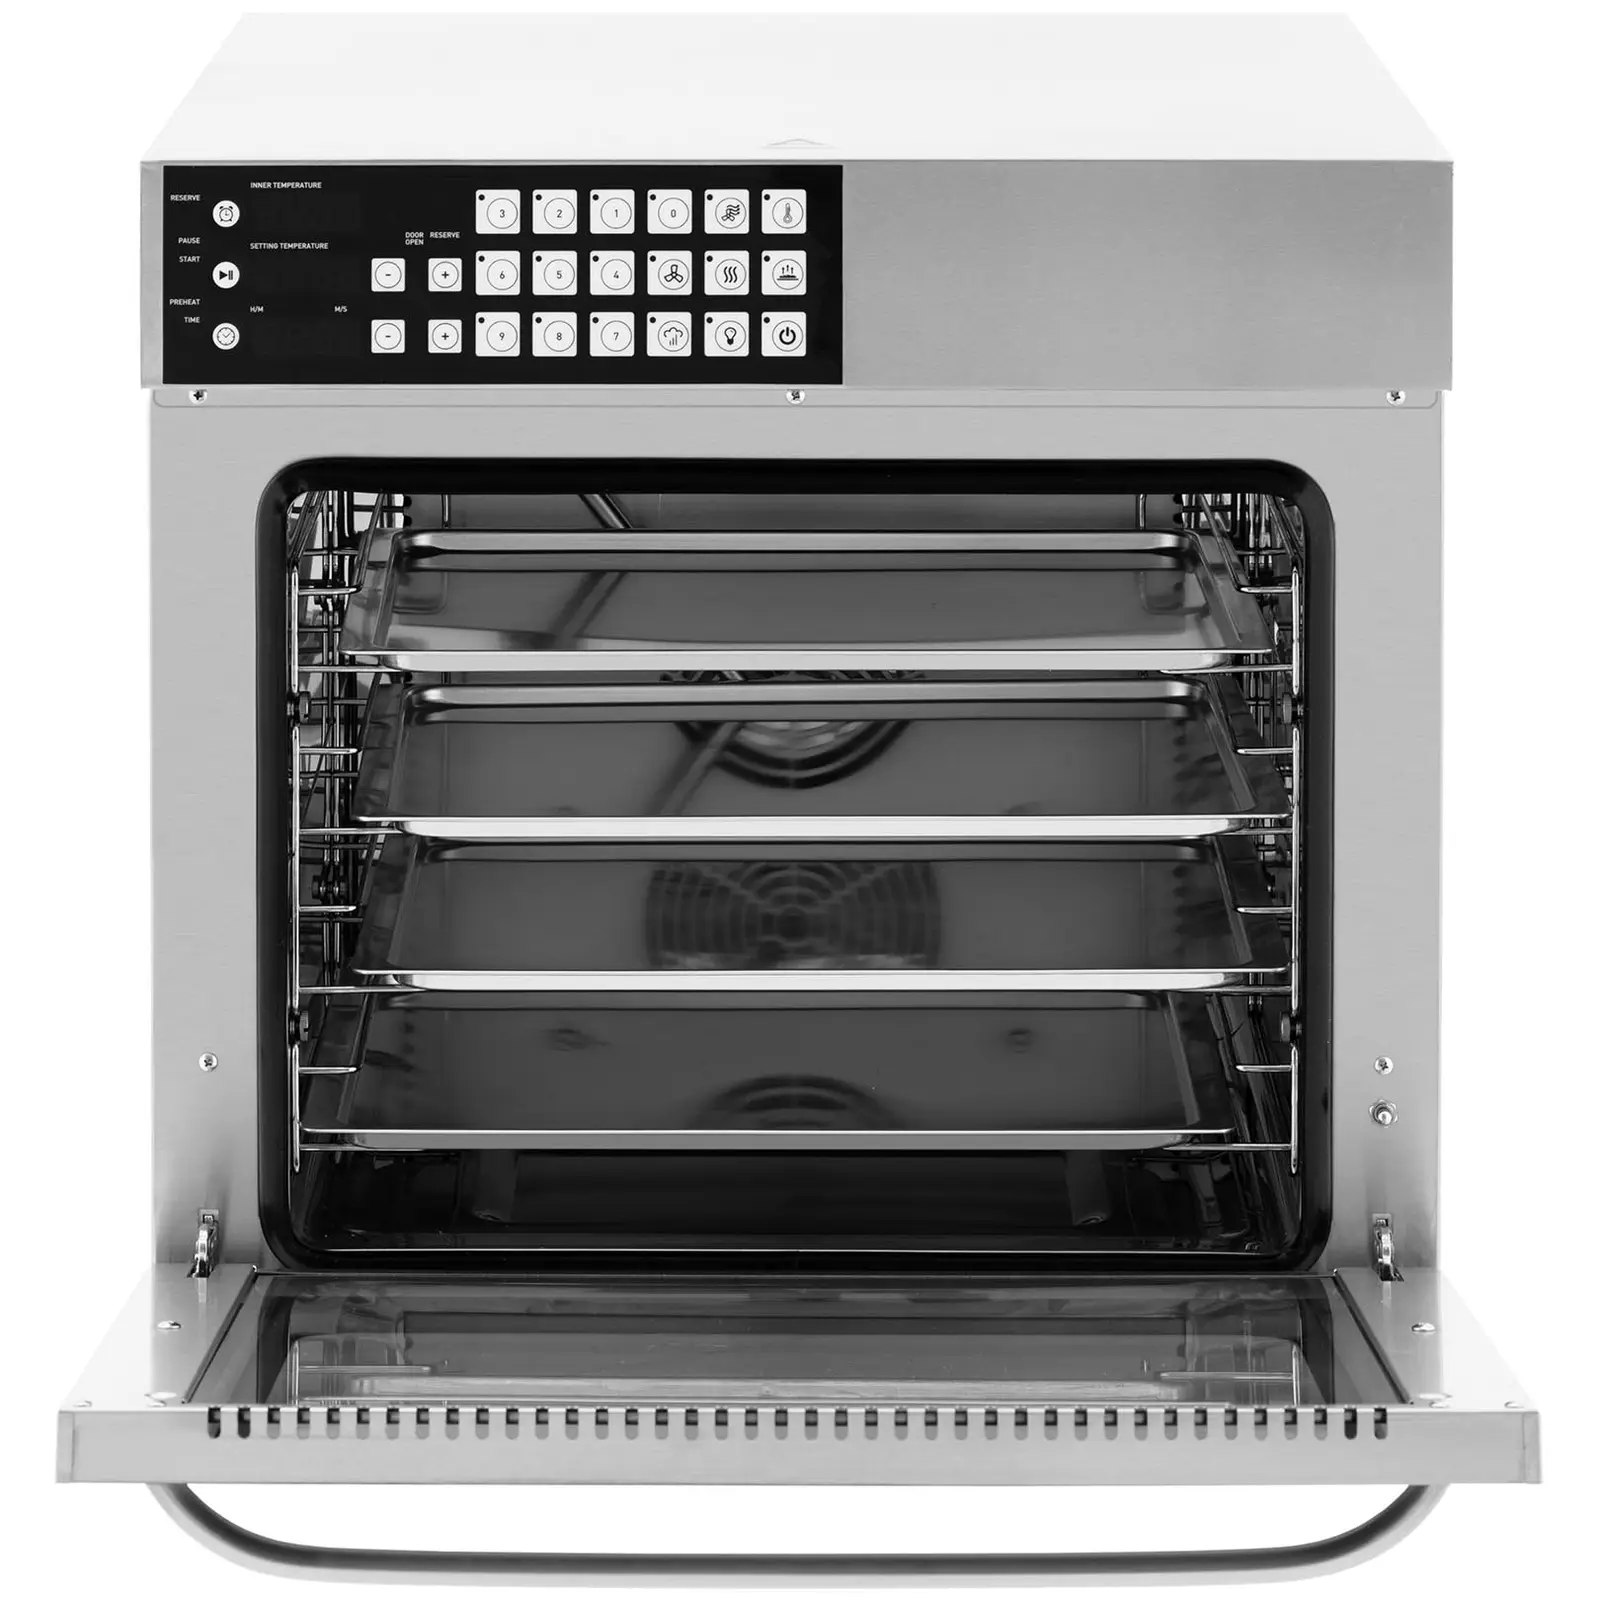 Hot air oven - 2800 W - Timer - 6 functions - 4 Trays - 4